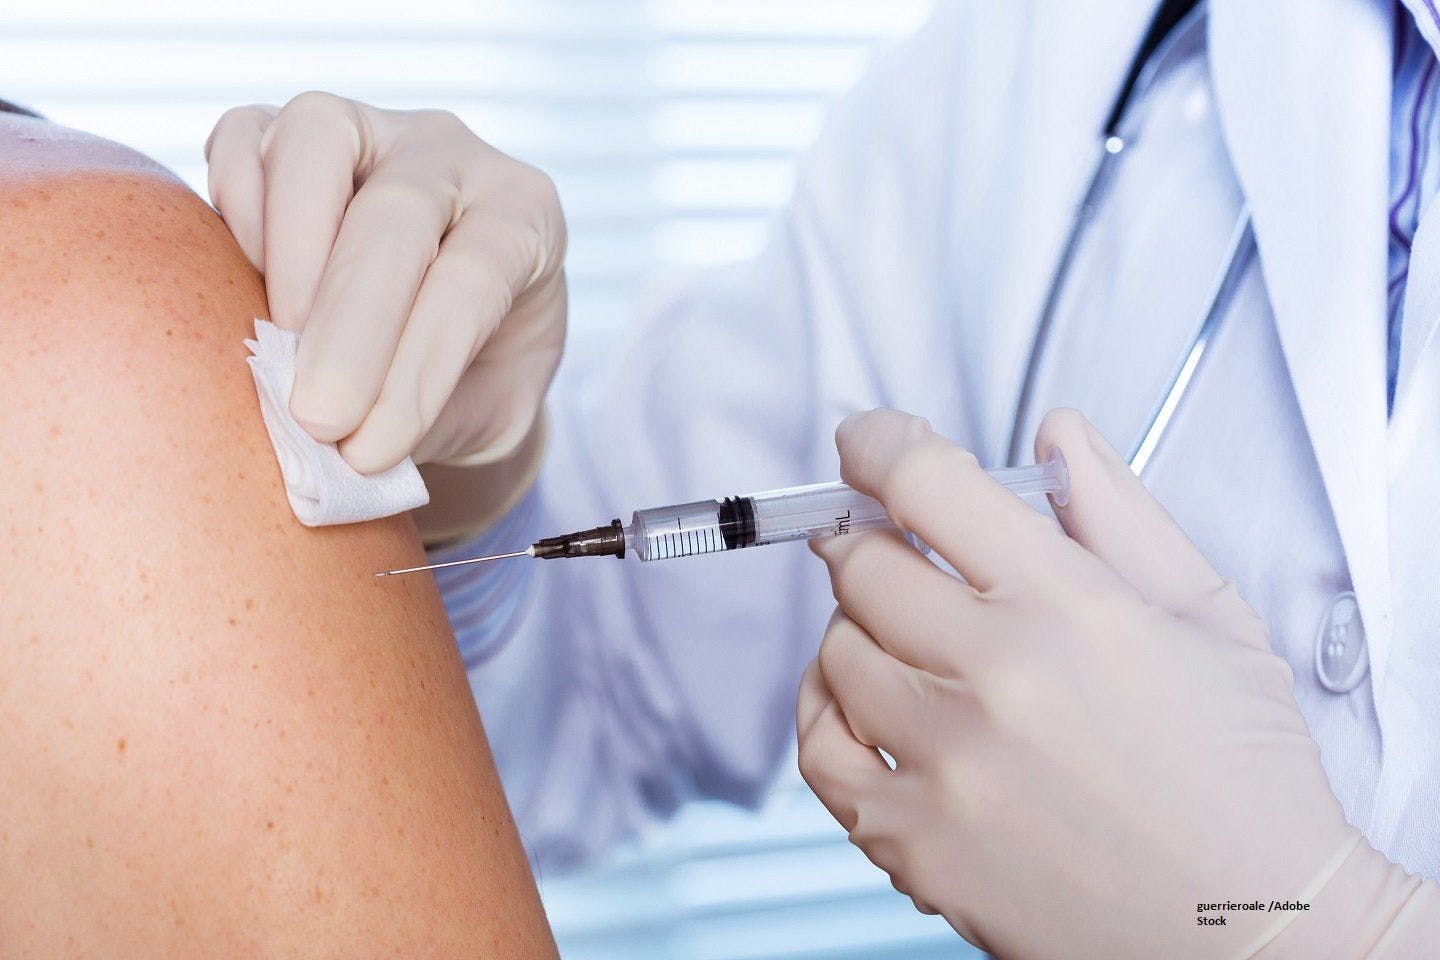 Physician perceptions a major barrier to adult vaccination